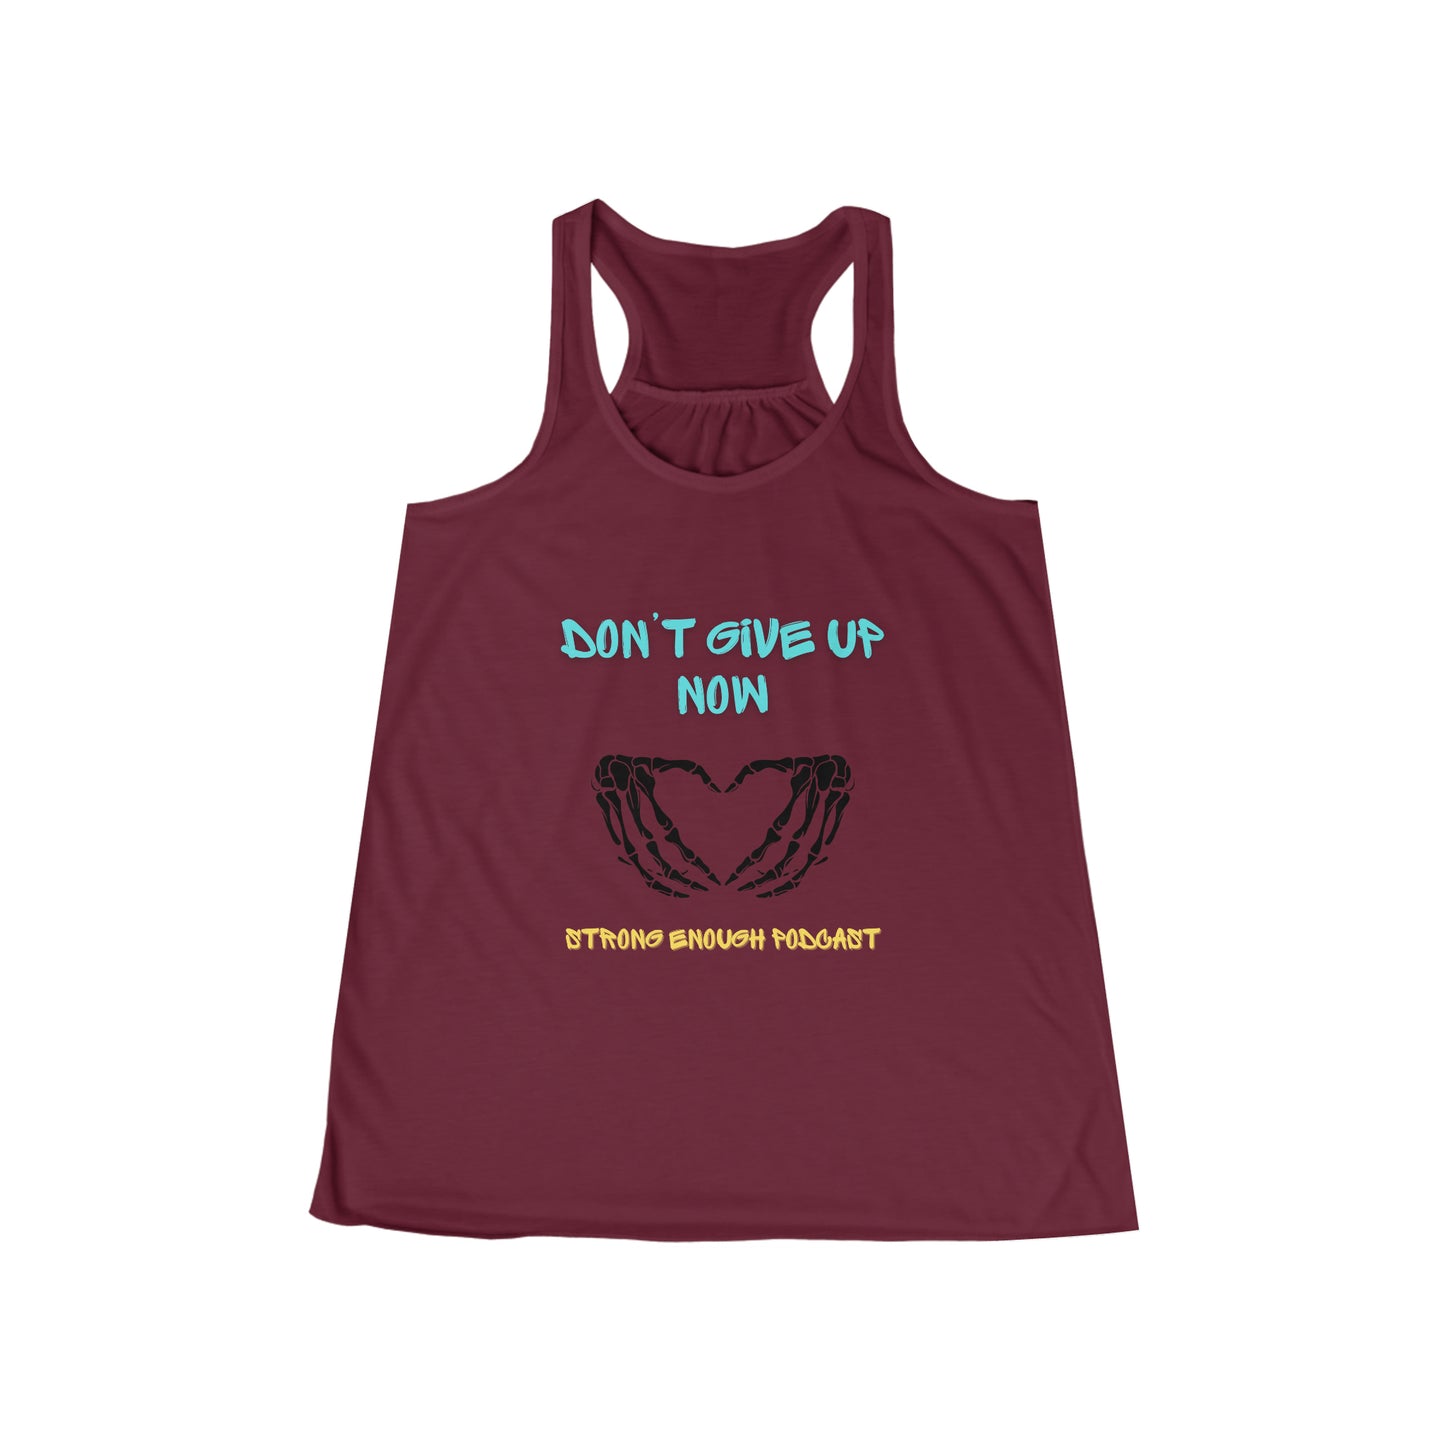 Don't Give Up Now Women's Flowy Racerback Tank